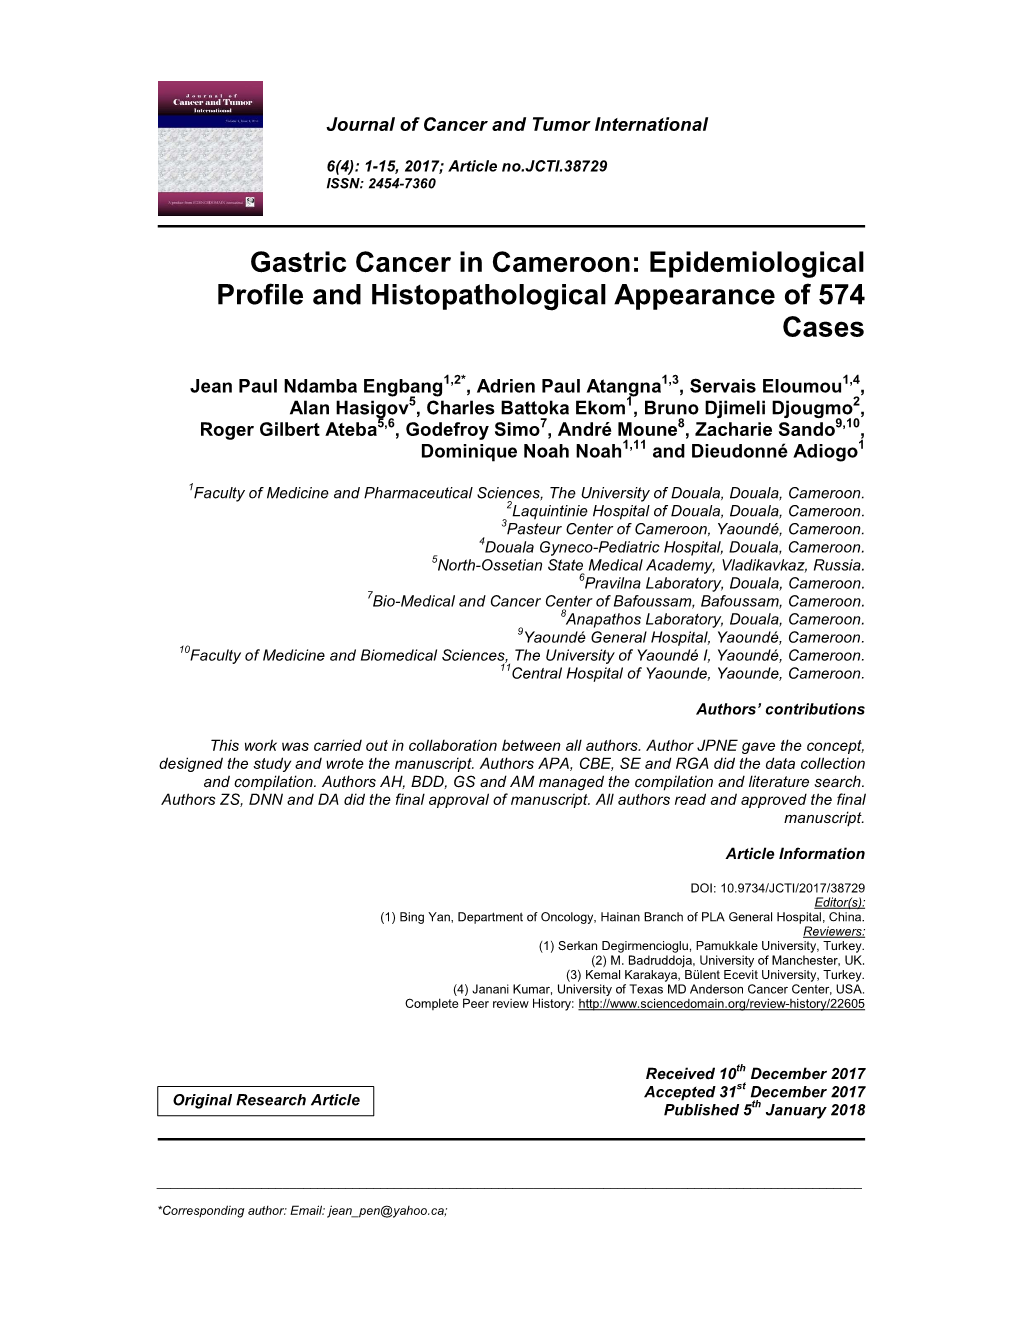 Gastric Cancer in Cameroon: Epidemiological Profile and Histopathological Appearance of 574 Cases